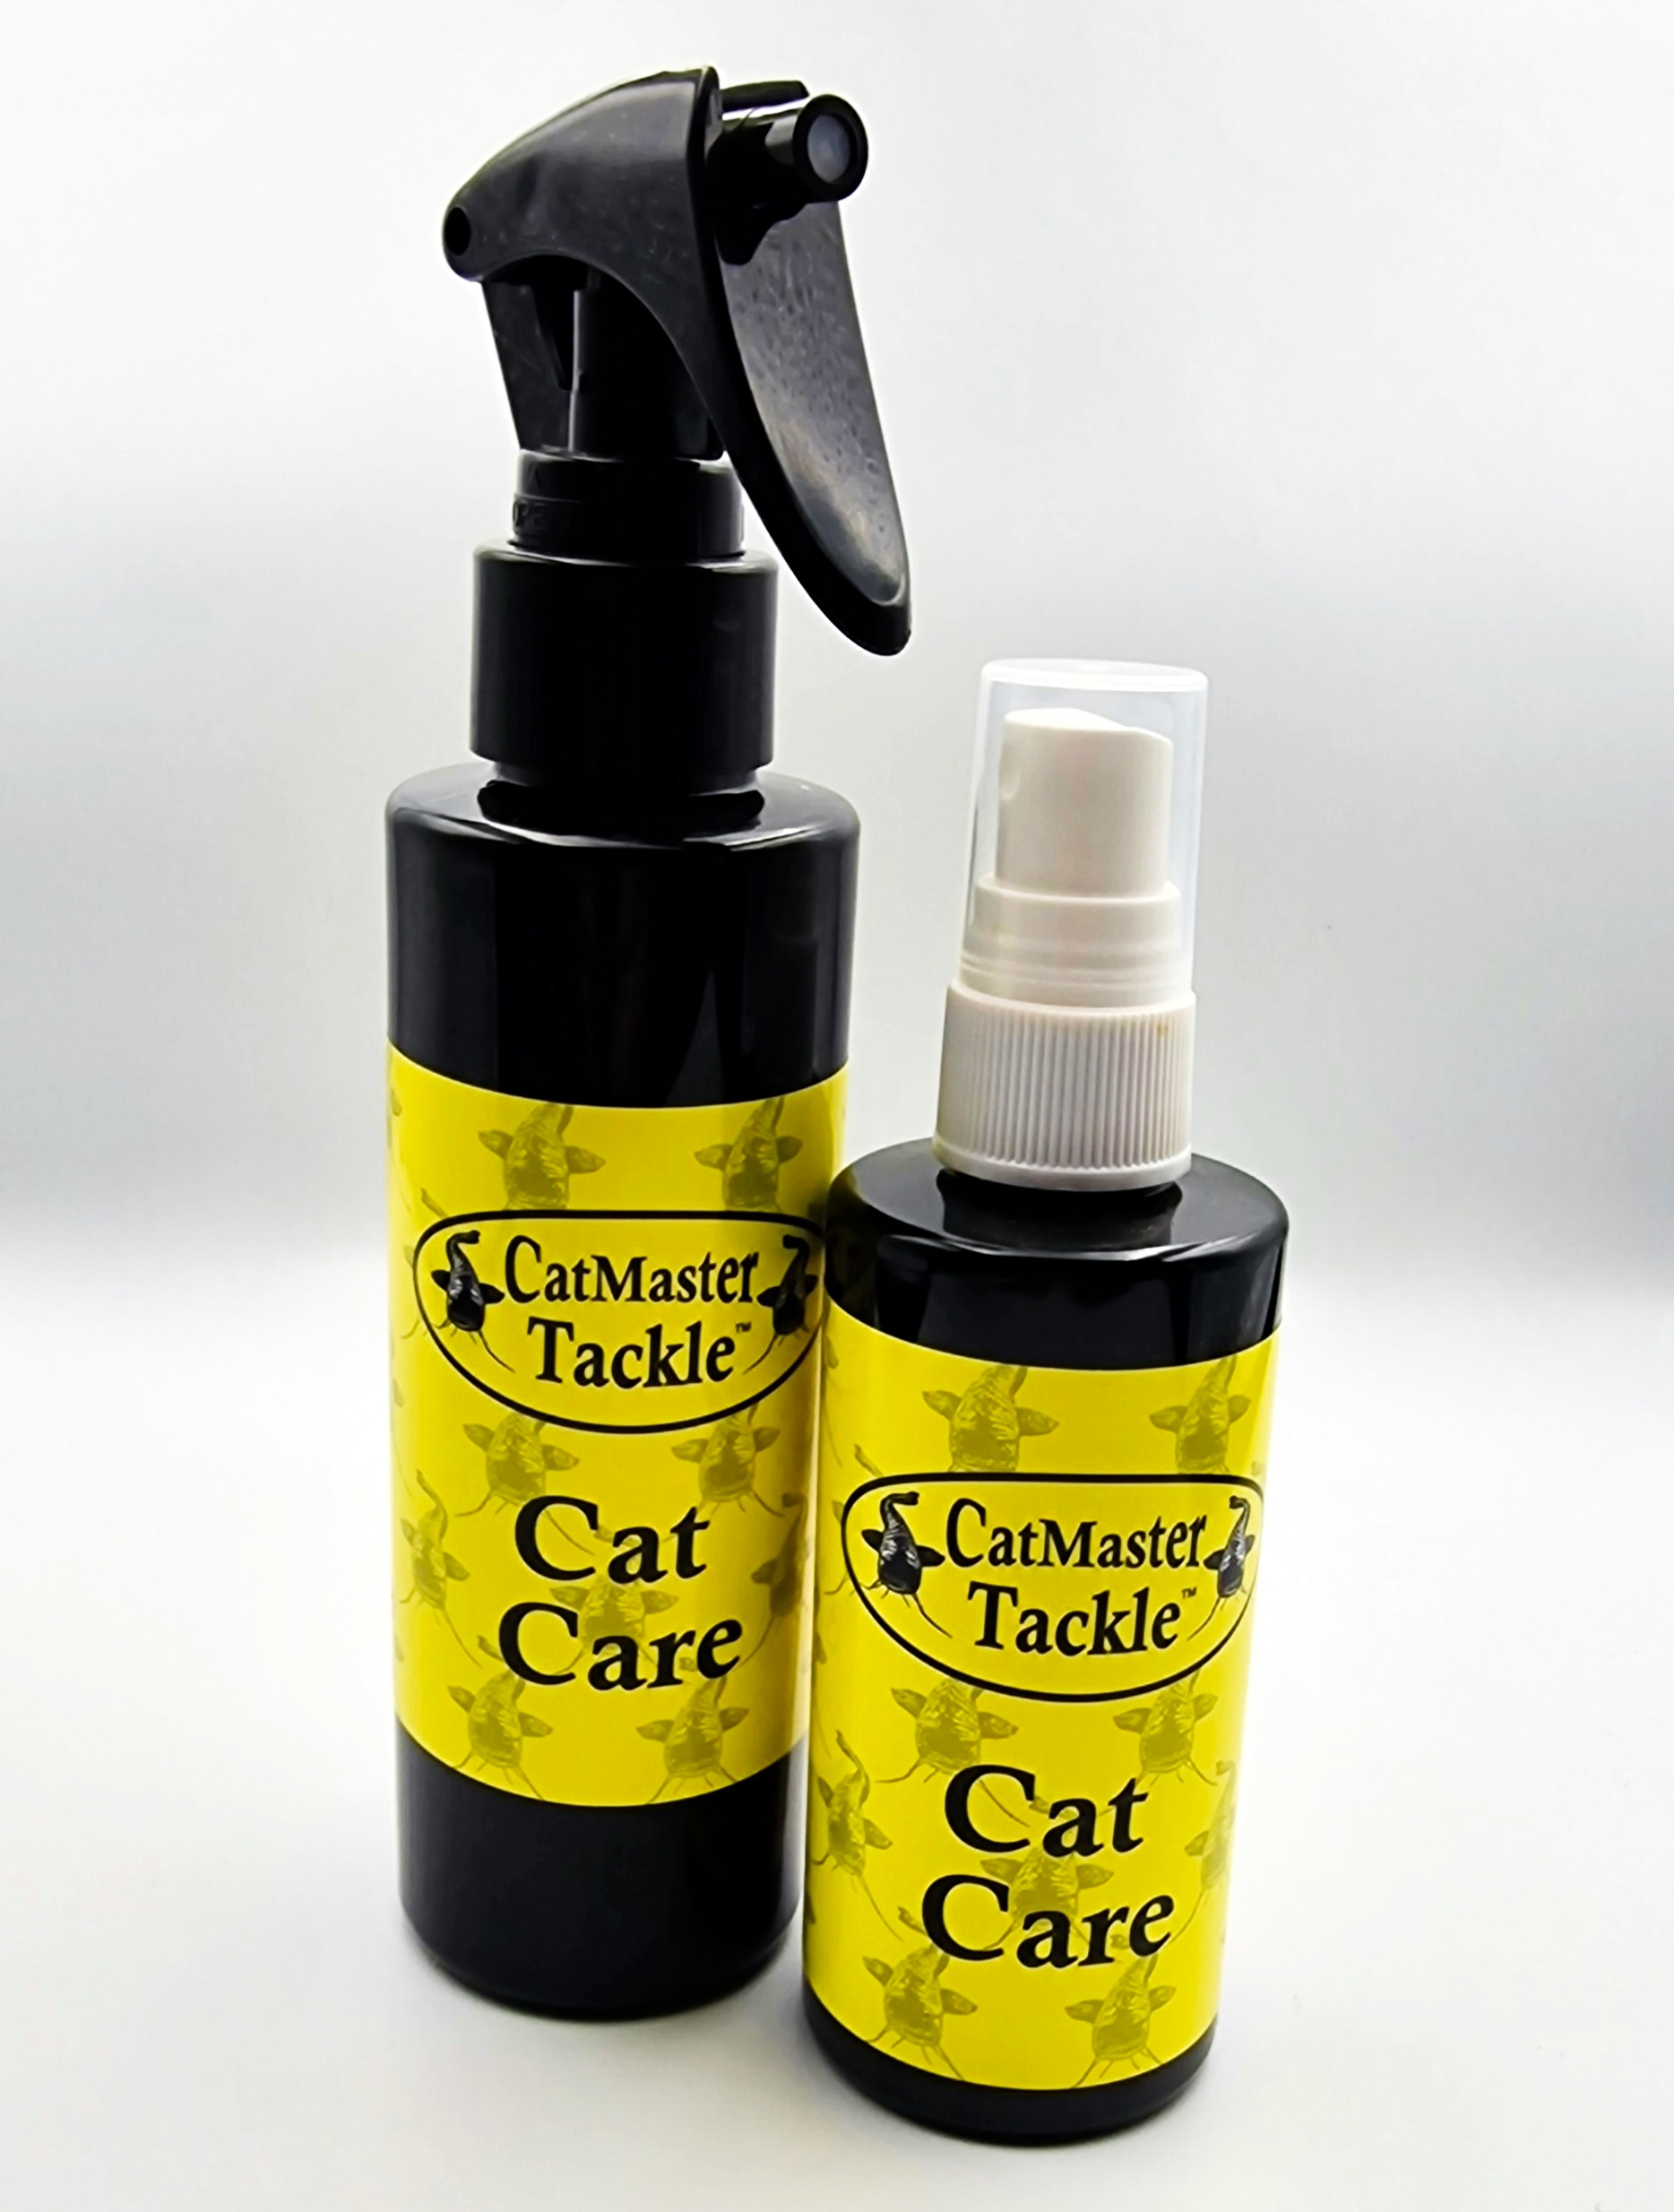 CatMaster Tackle Cat Care Antiseptic 150ml